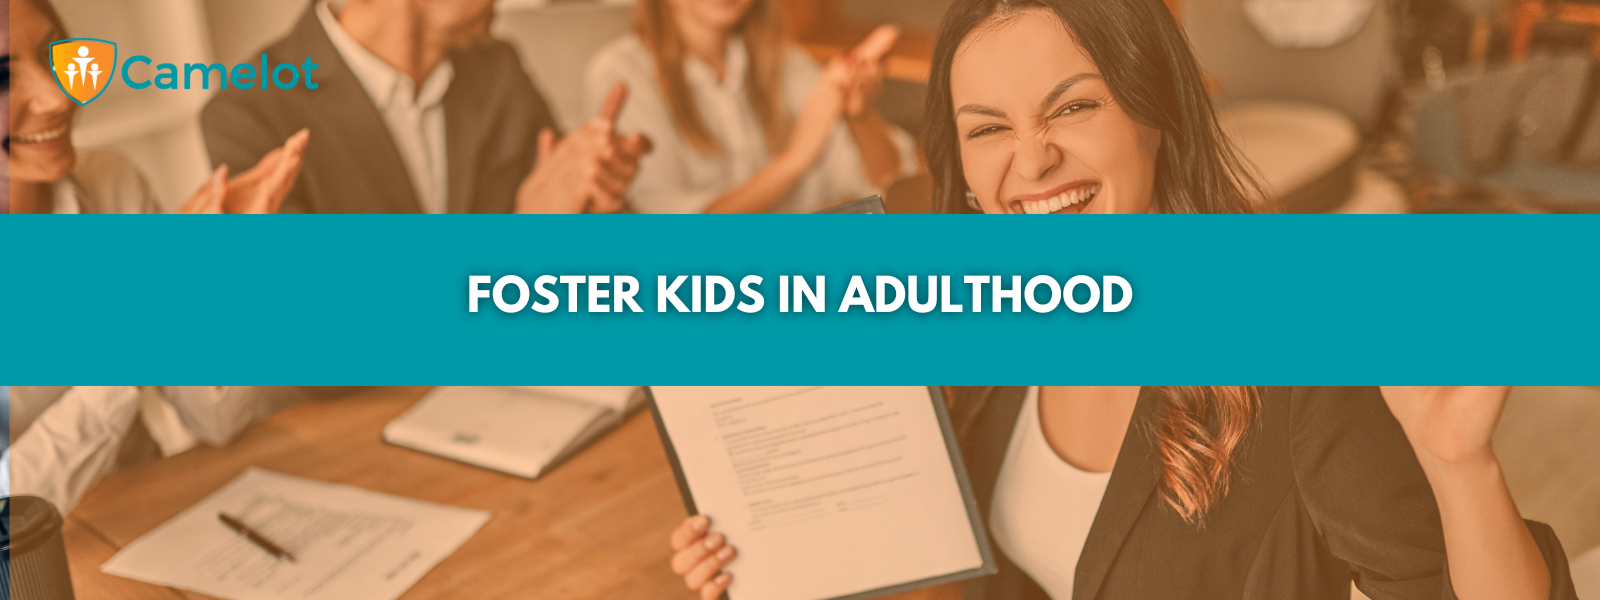 Foster Kids as Adults | Camelot